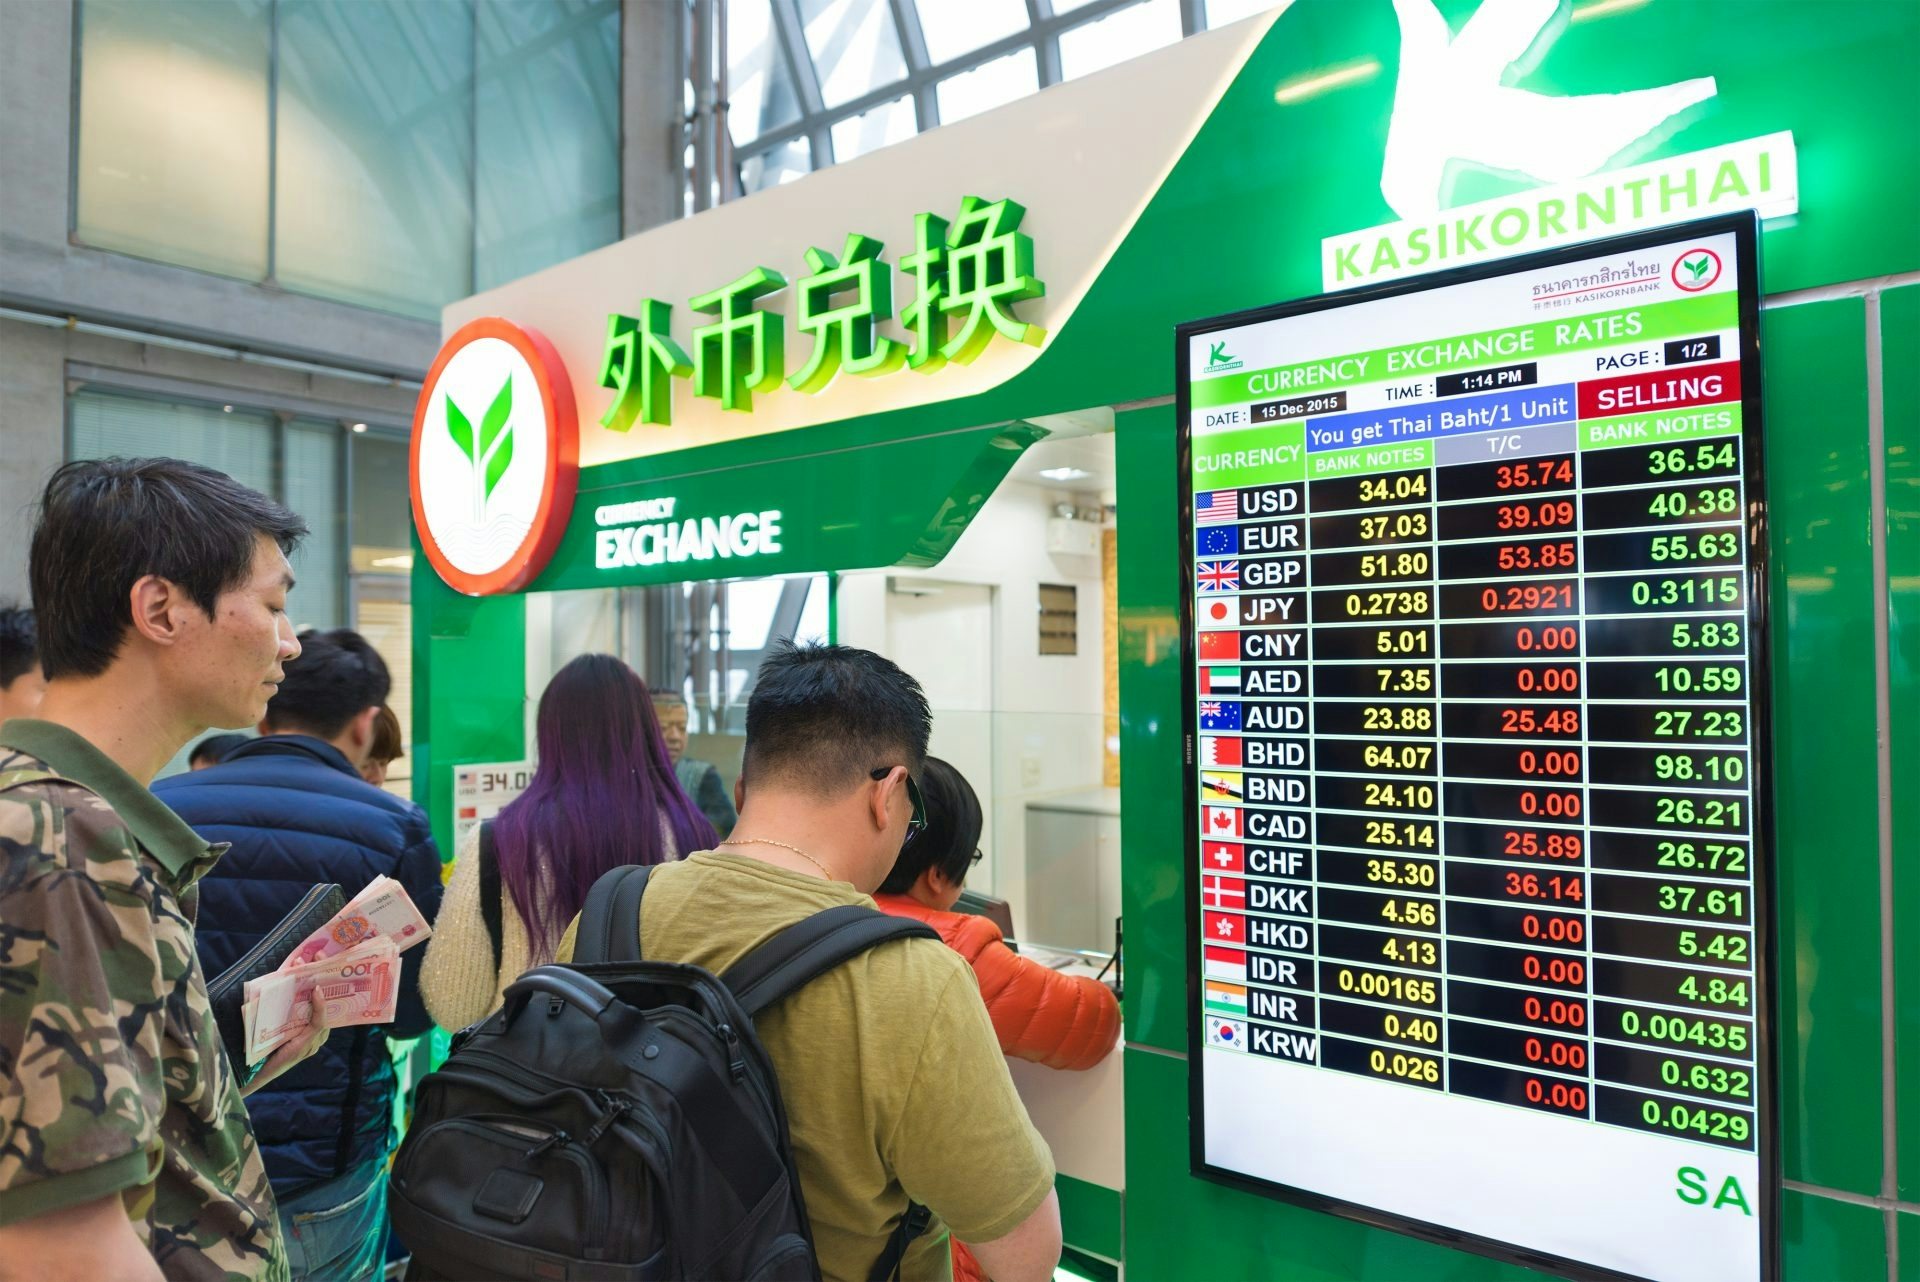 Favorable exchange rates remains one of the most important factors behind Chinese tourist behavior. (withGod/Shutterstock)